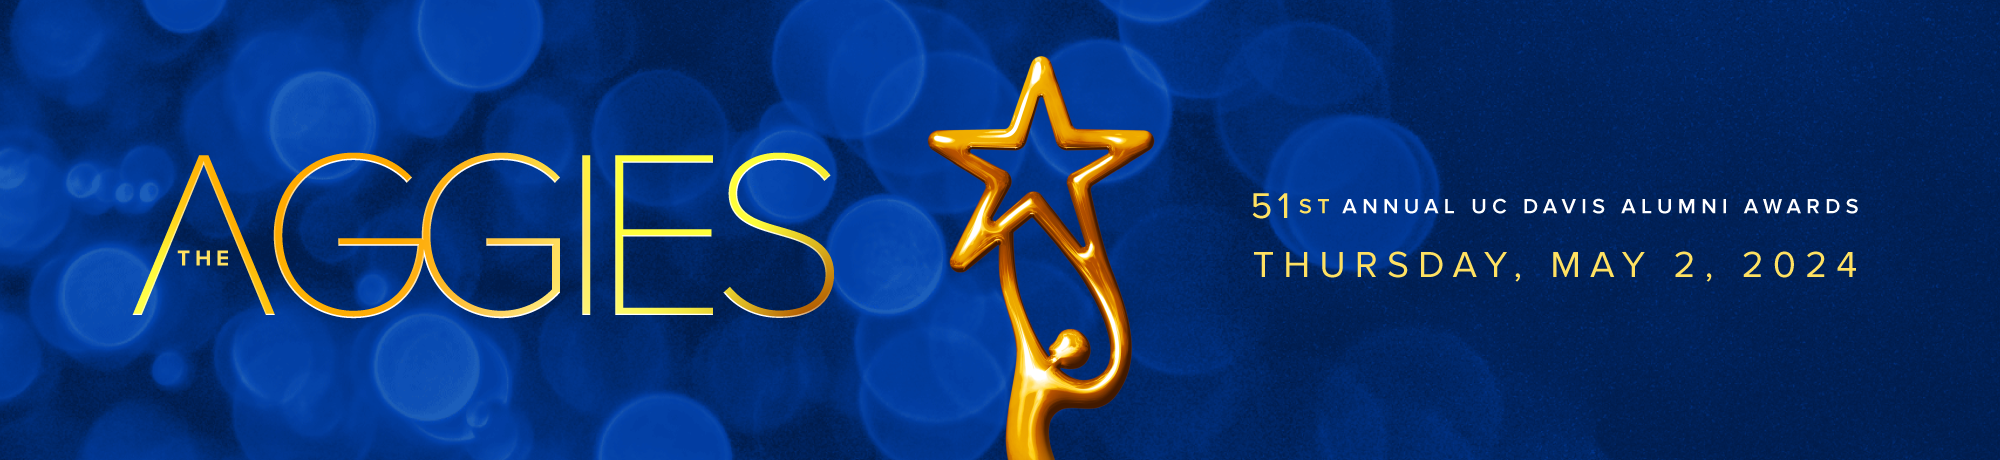 text over blue background and gold award statue, the aggies 51st annual uc davis alumni awards thursday, may 2, 2024